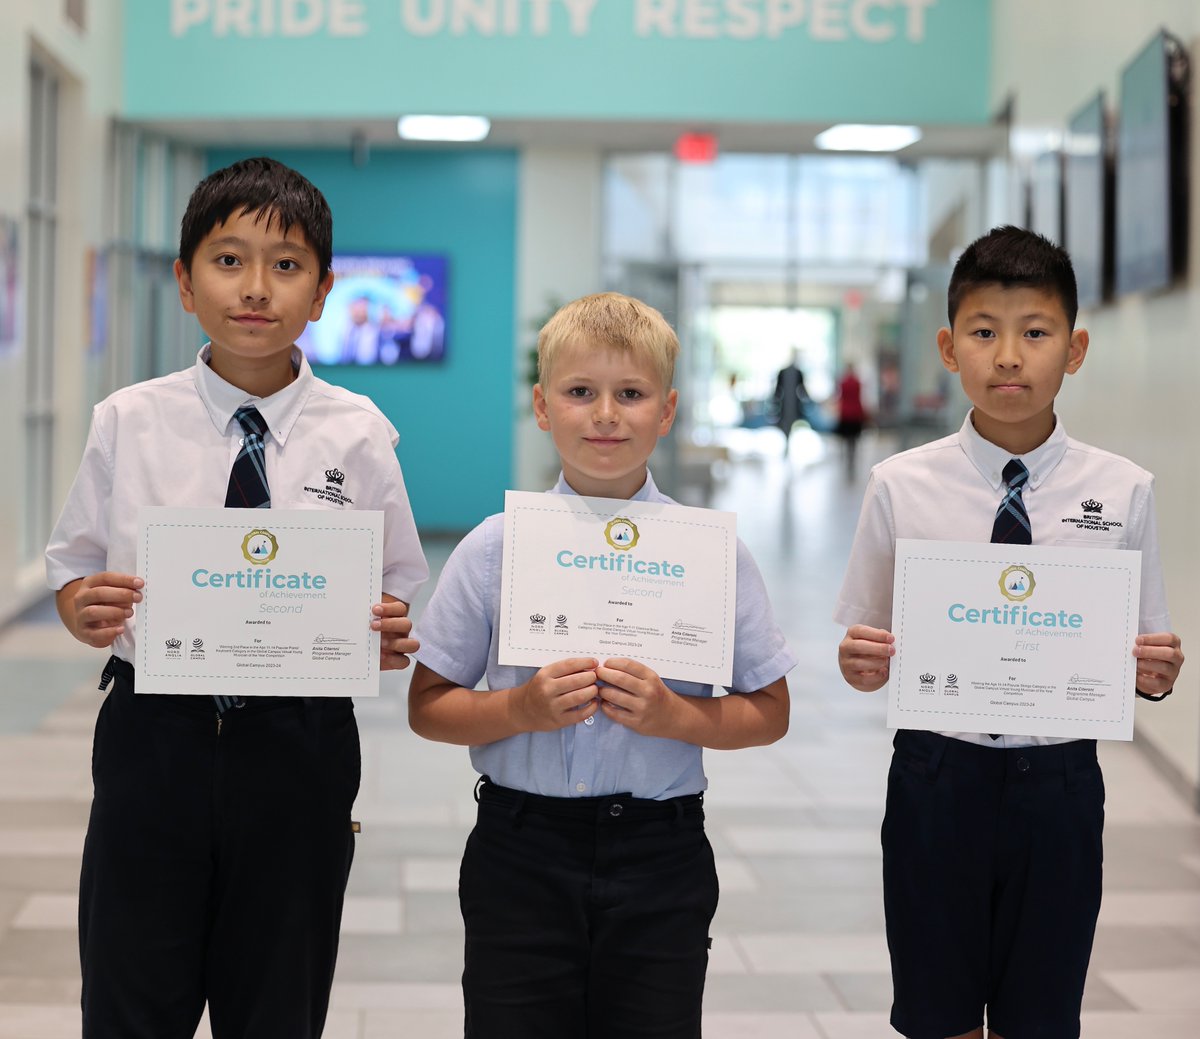 The results are in for our Global Campus Virtual Young Musician of the Year Competition! Let's congratulate our winners:
Y7 Brandon WINNER of Popular Strings 
Y7 Zihao 2nd Place for Popular Piano 
Y3 Jakob 2nd Place for Classical Brass 
#YoungMusician #NordAngliaEducation